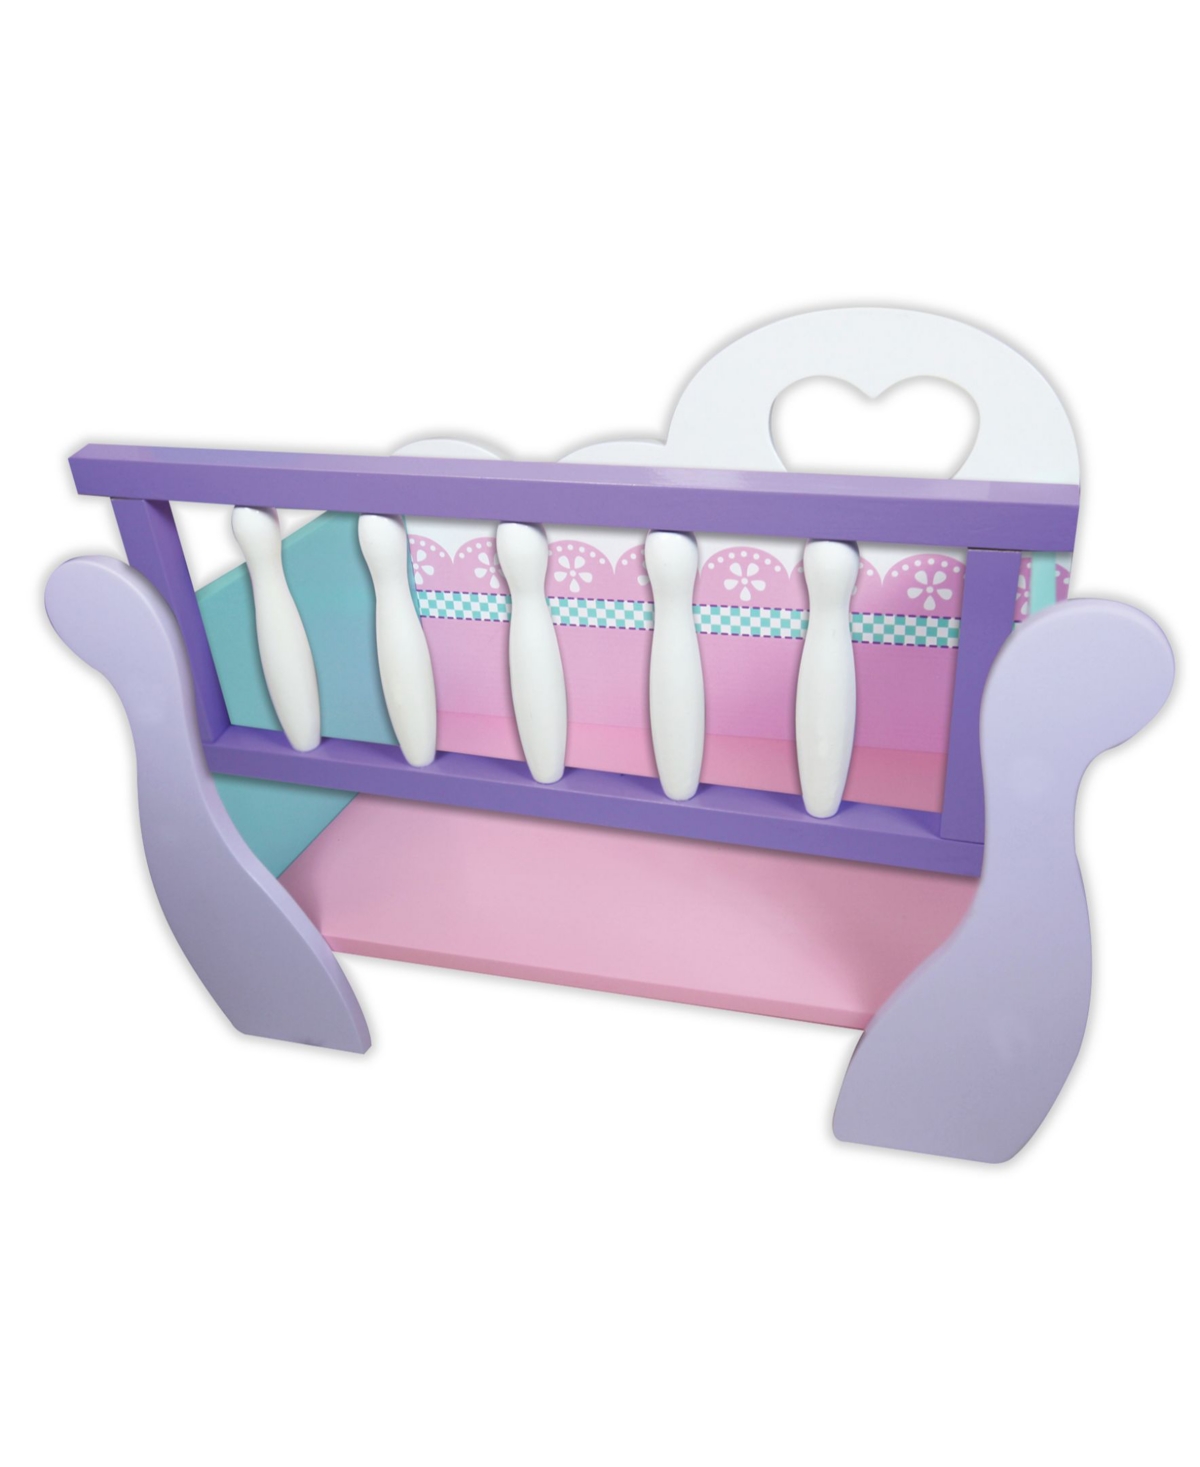 Lissi Dolls Lissi Wooden Baby Doll Cradle In Multi